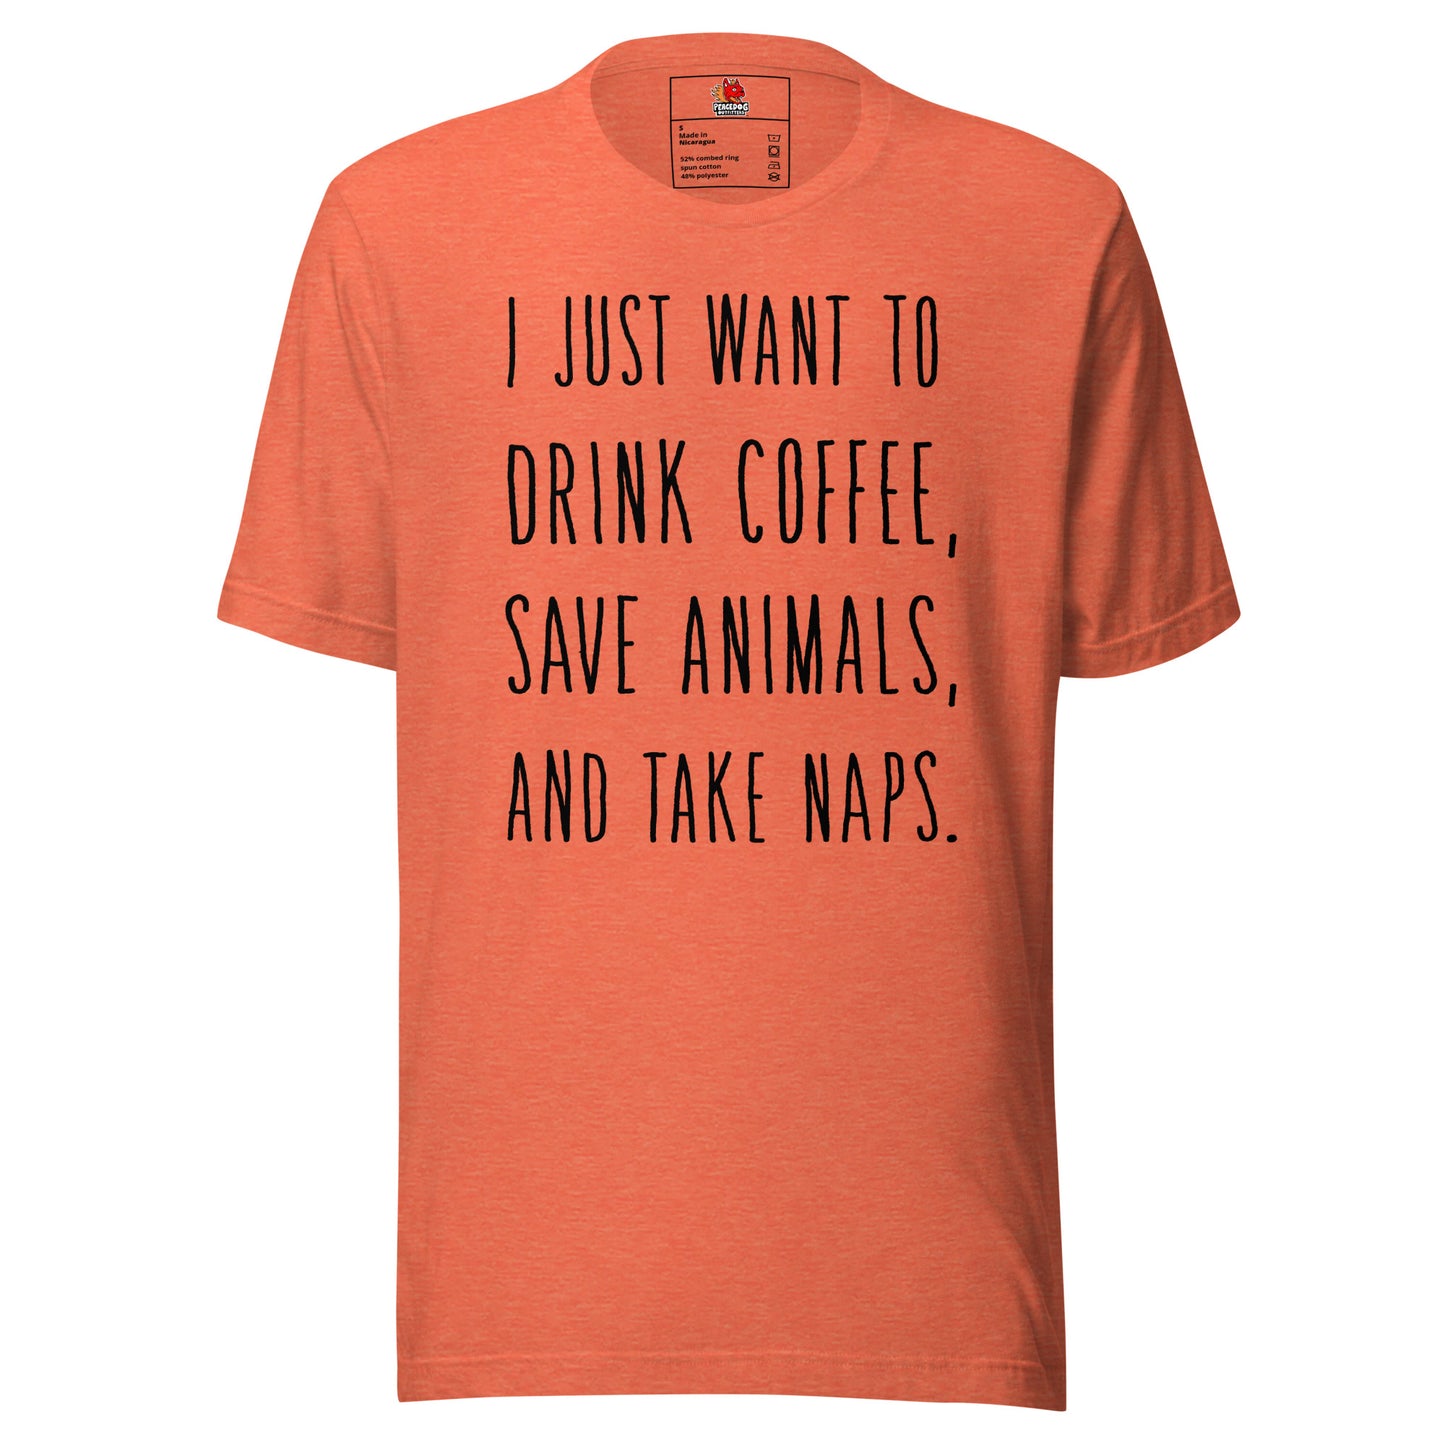 I Just Want Coffee and to Save Animals... T-shirt